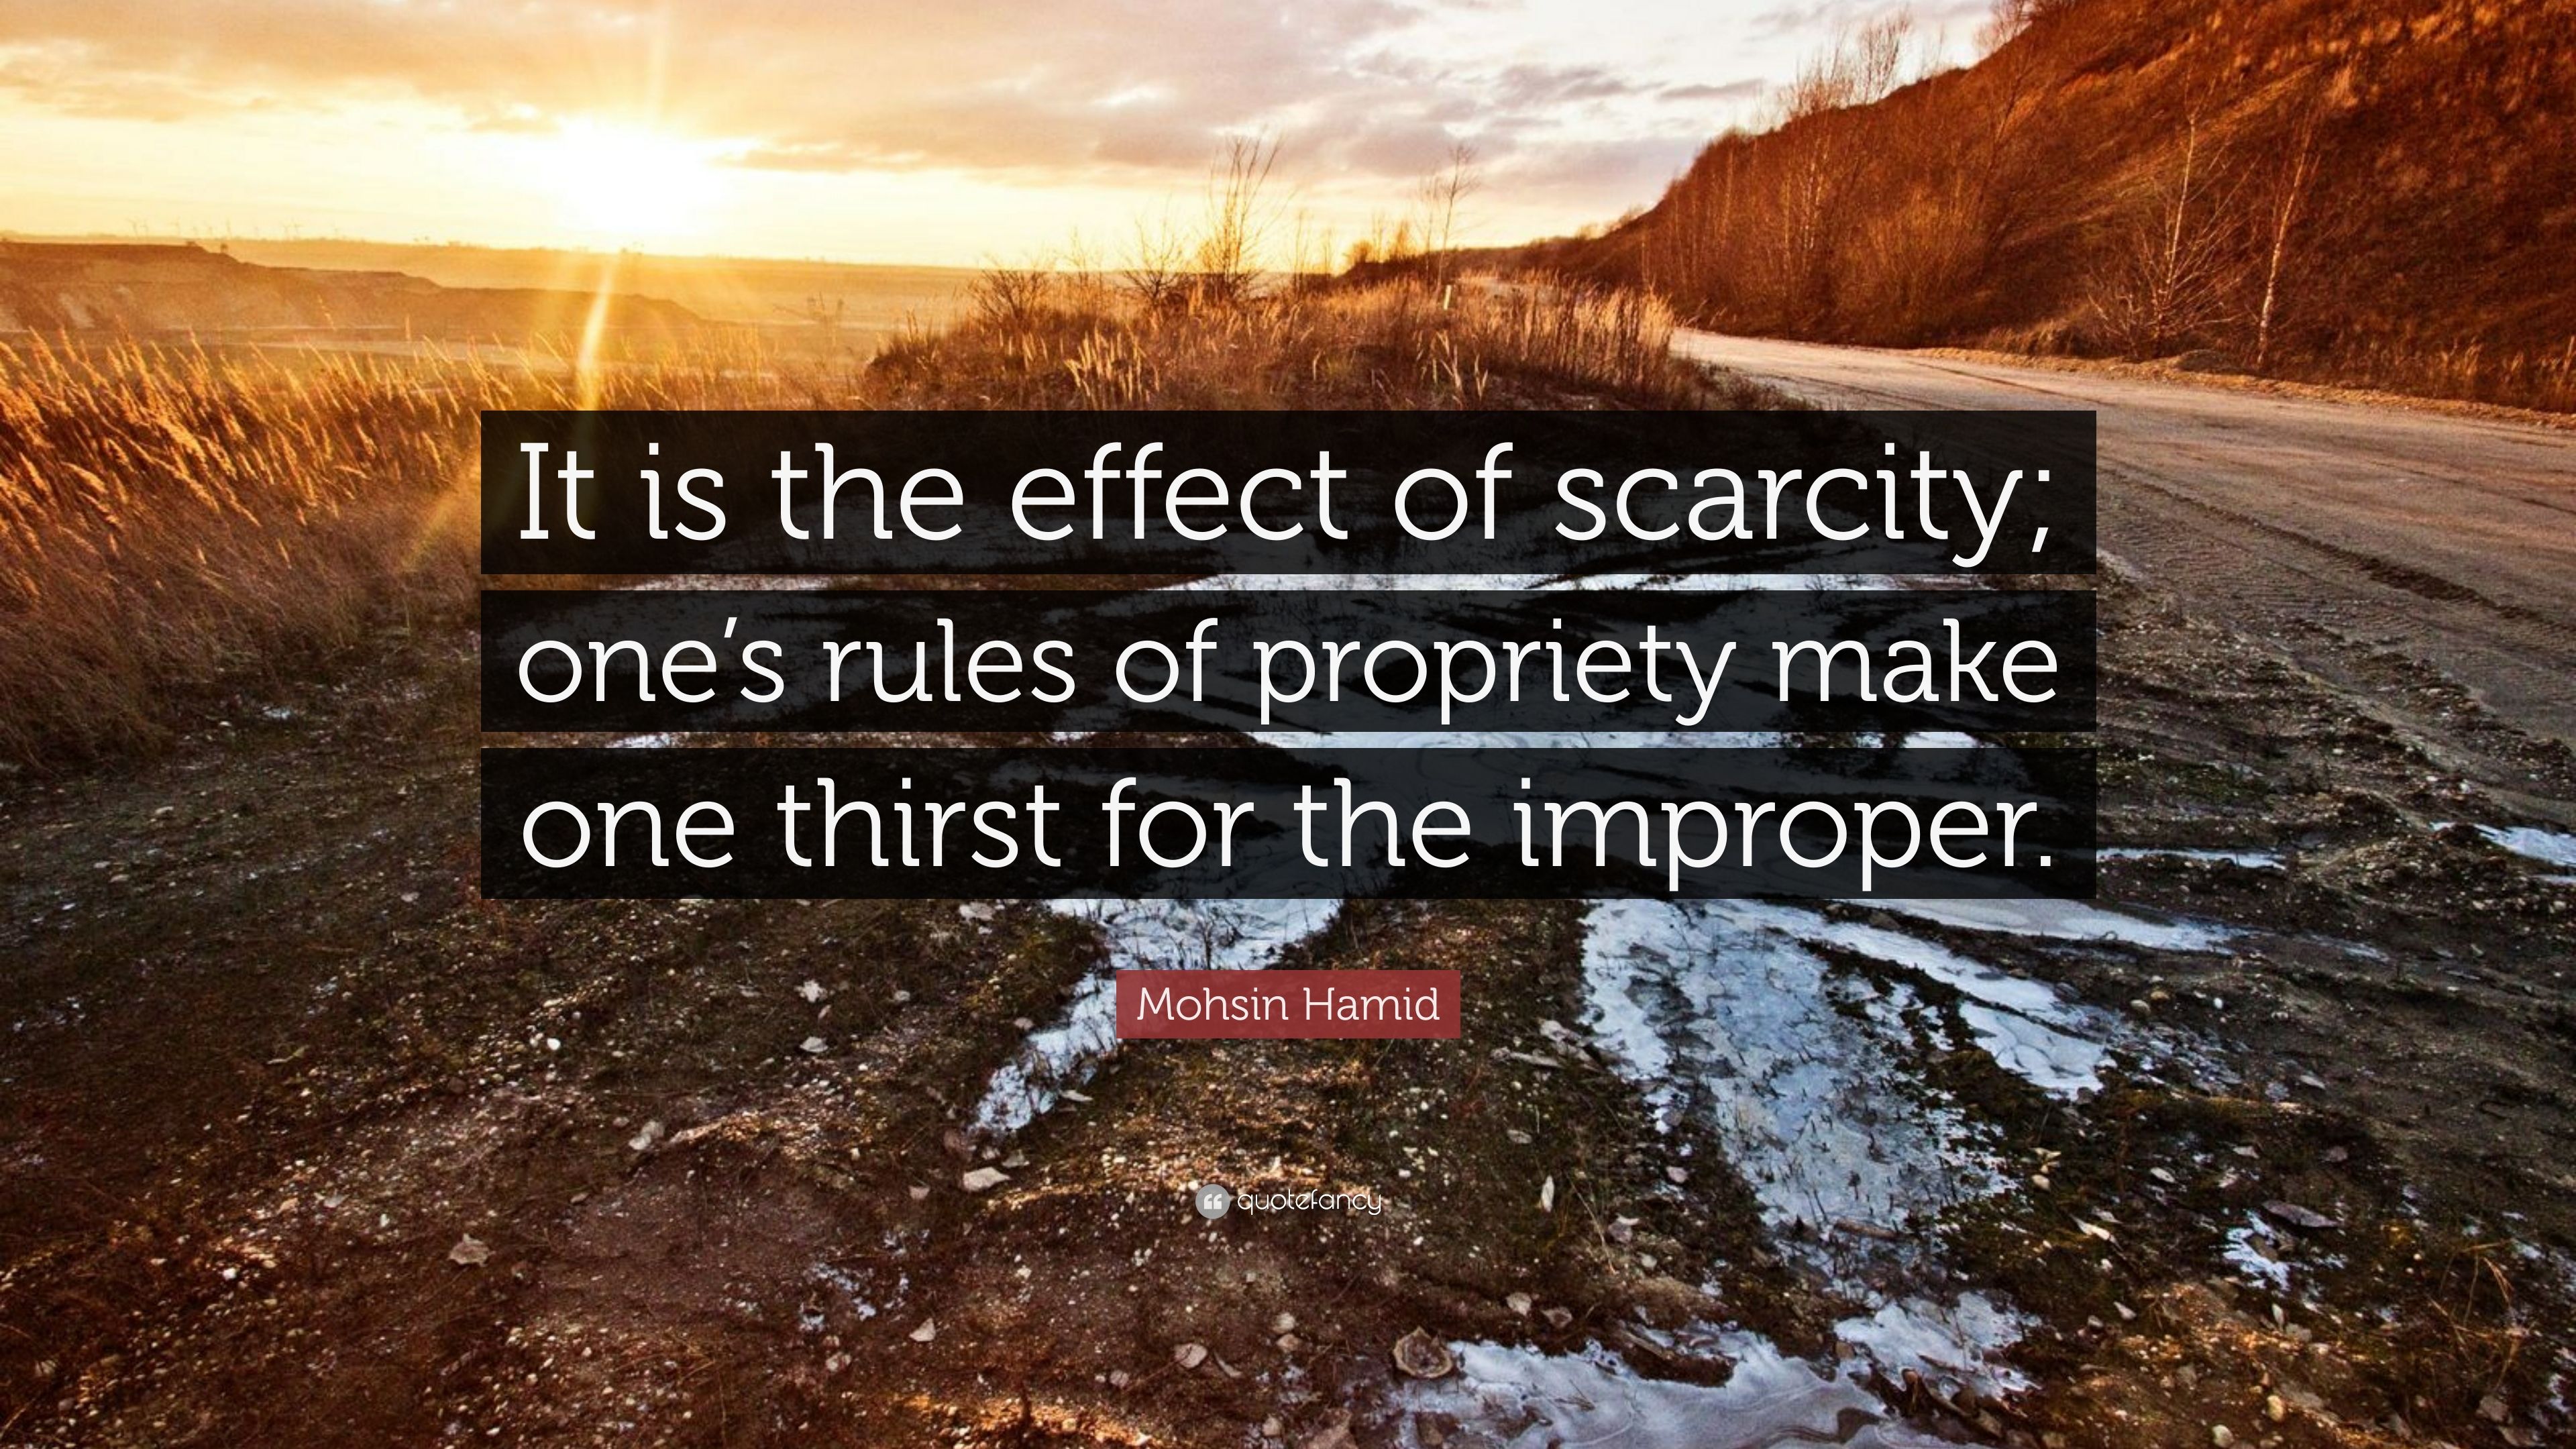 Mohsin Hamid Quote: “It is the effect of scarcity; one's rules